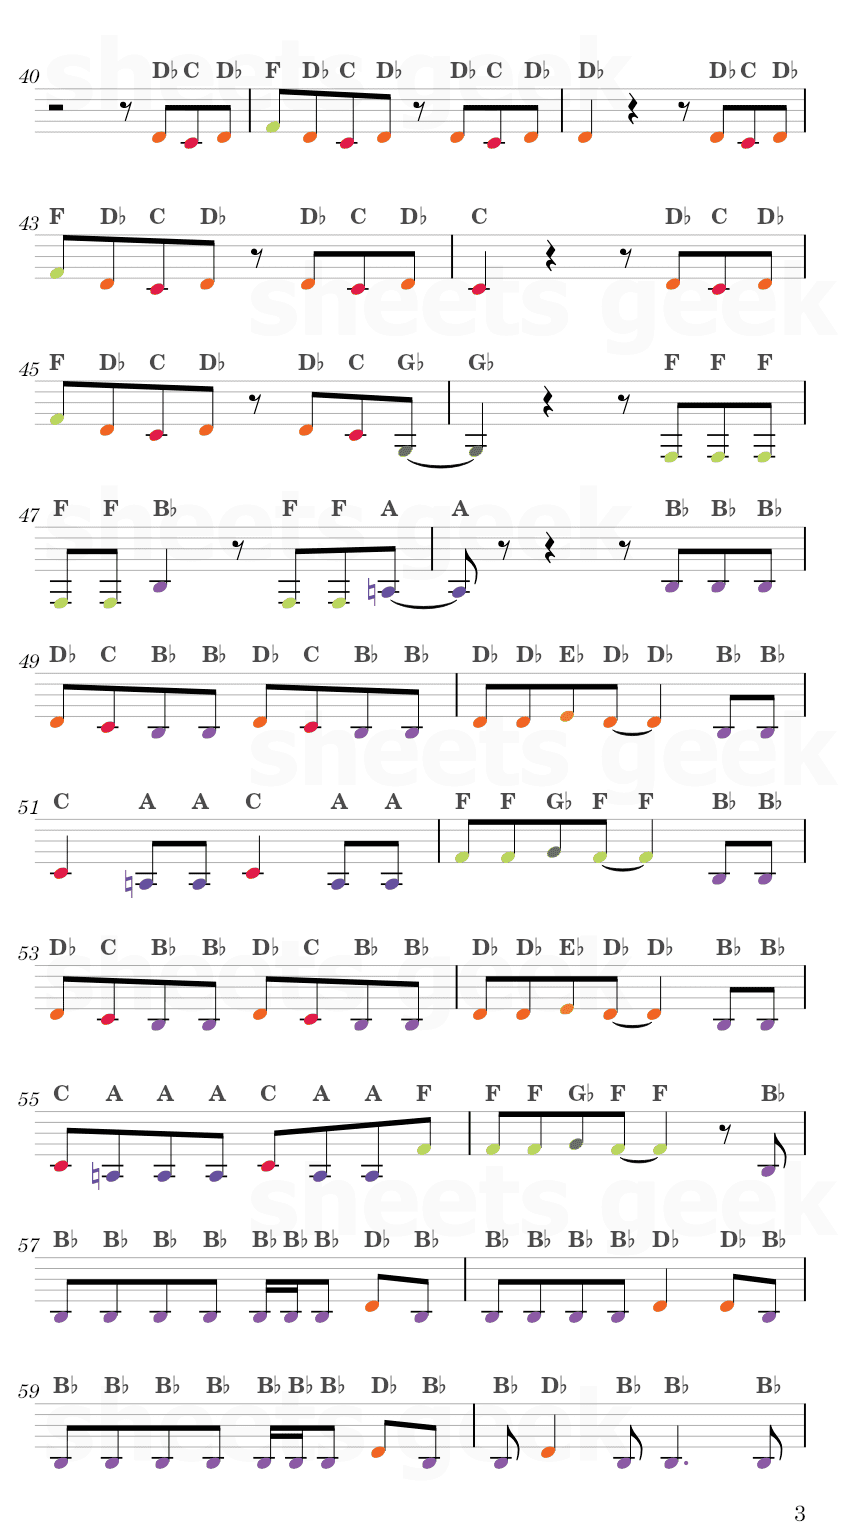 Sharks - Imagine Dragons Easy Sheet Music Free for piano, keyboard, flute, violin, sax, cello page 3